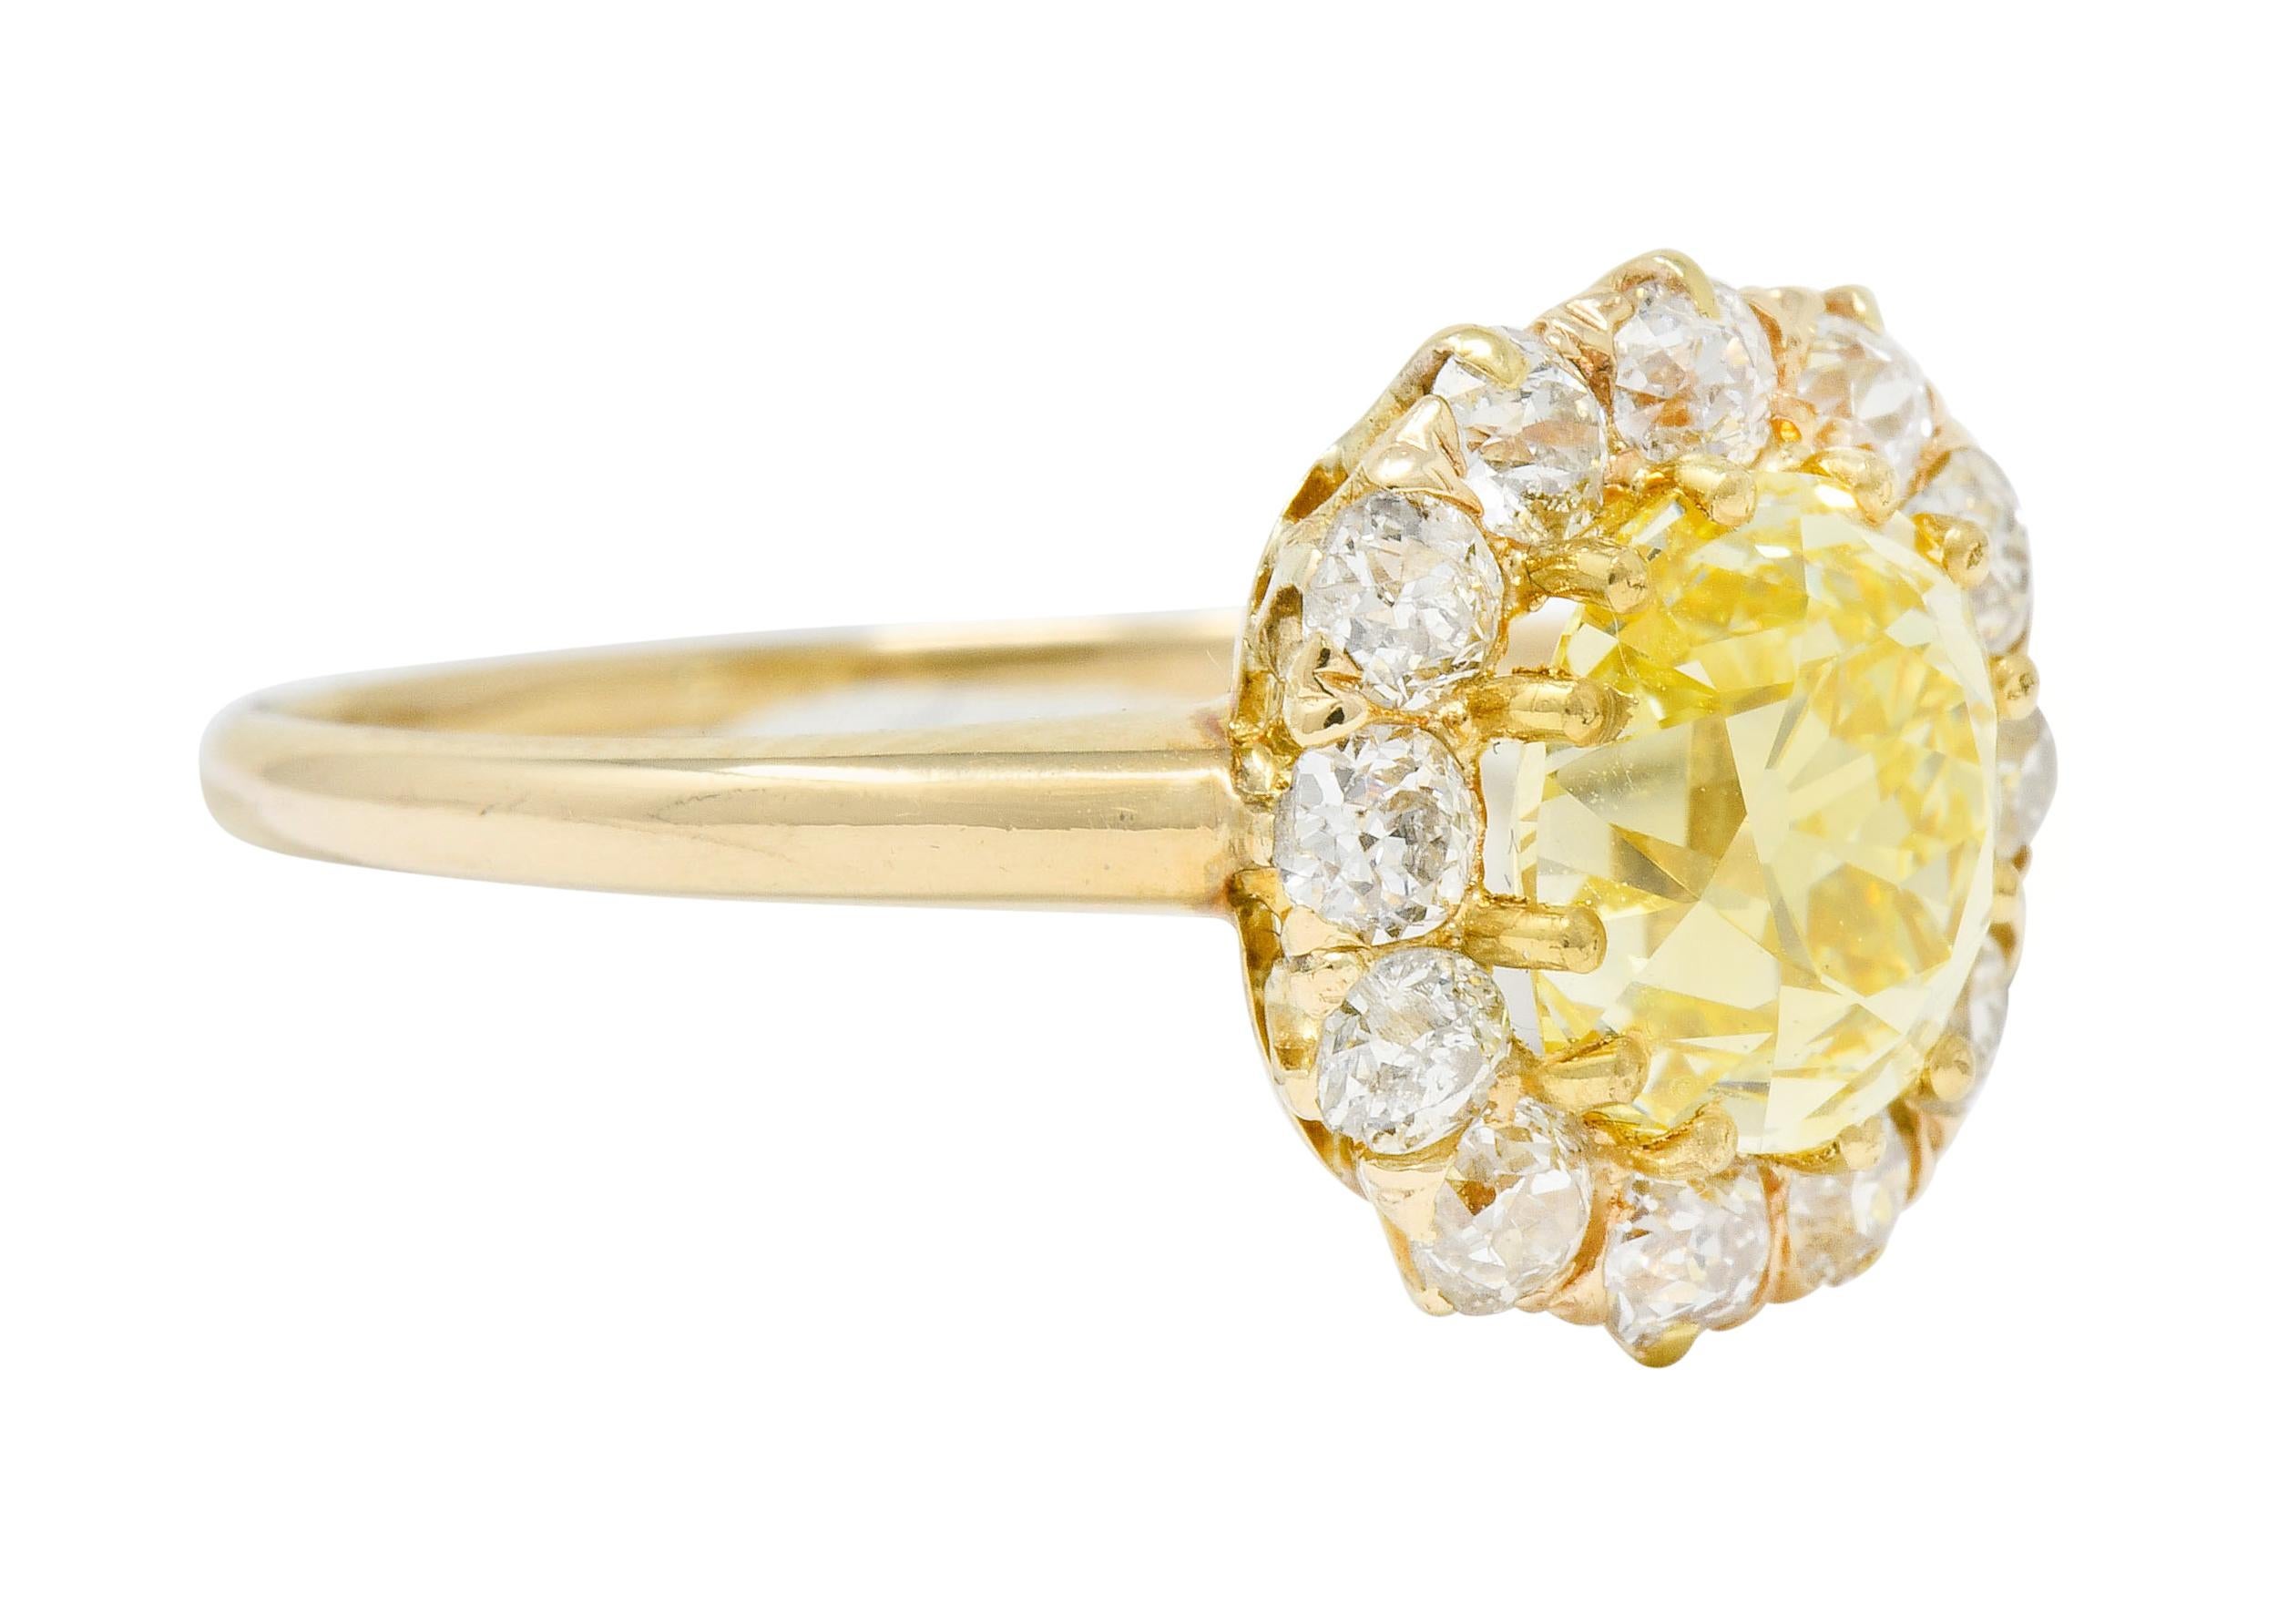 Centering an old mine cut natural fancy yellow diamond weighing 2.09 carats, with VS1 clarity

Surrounded by old European cut diamonds weighing approximately 0.50 carat total; I to M color with SI to I clarity

Tested as 14 karat gold

Circa: